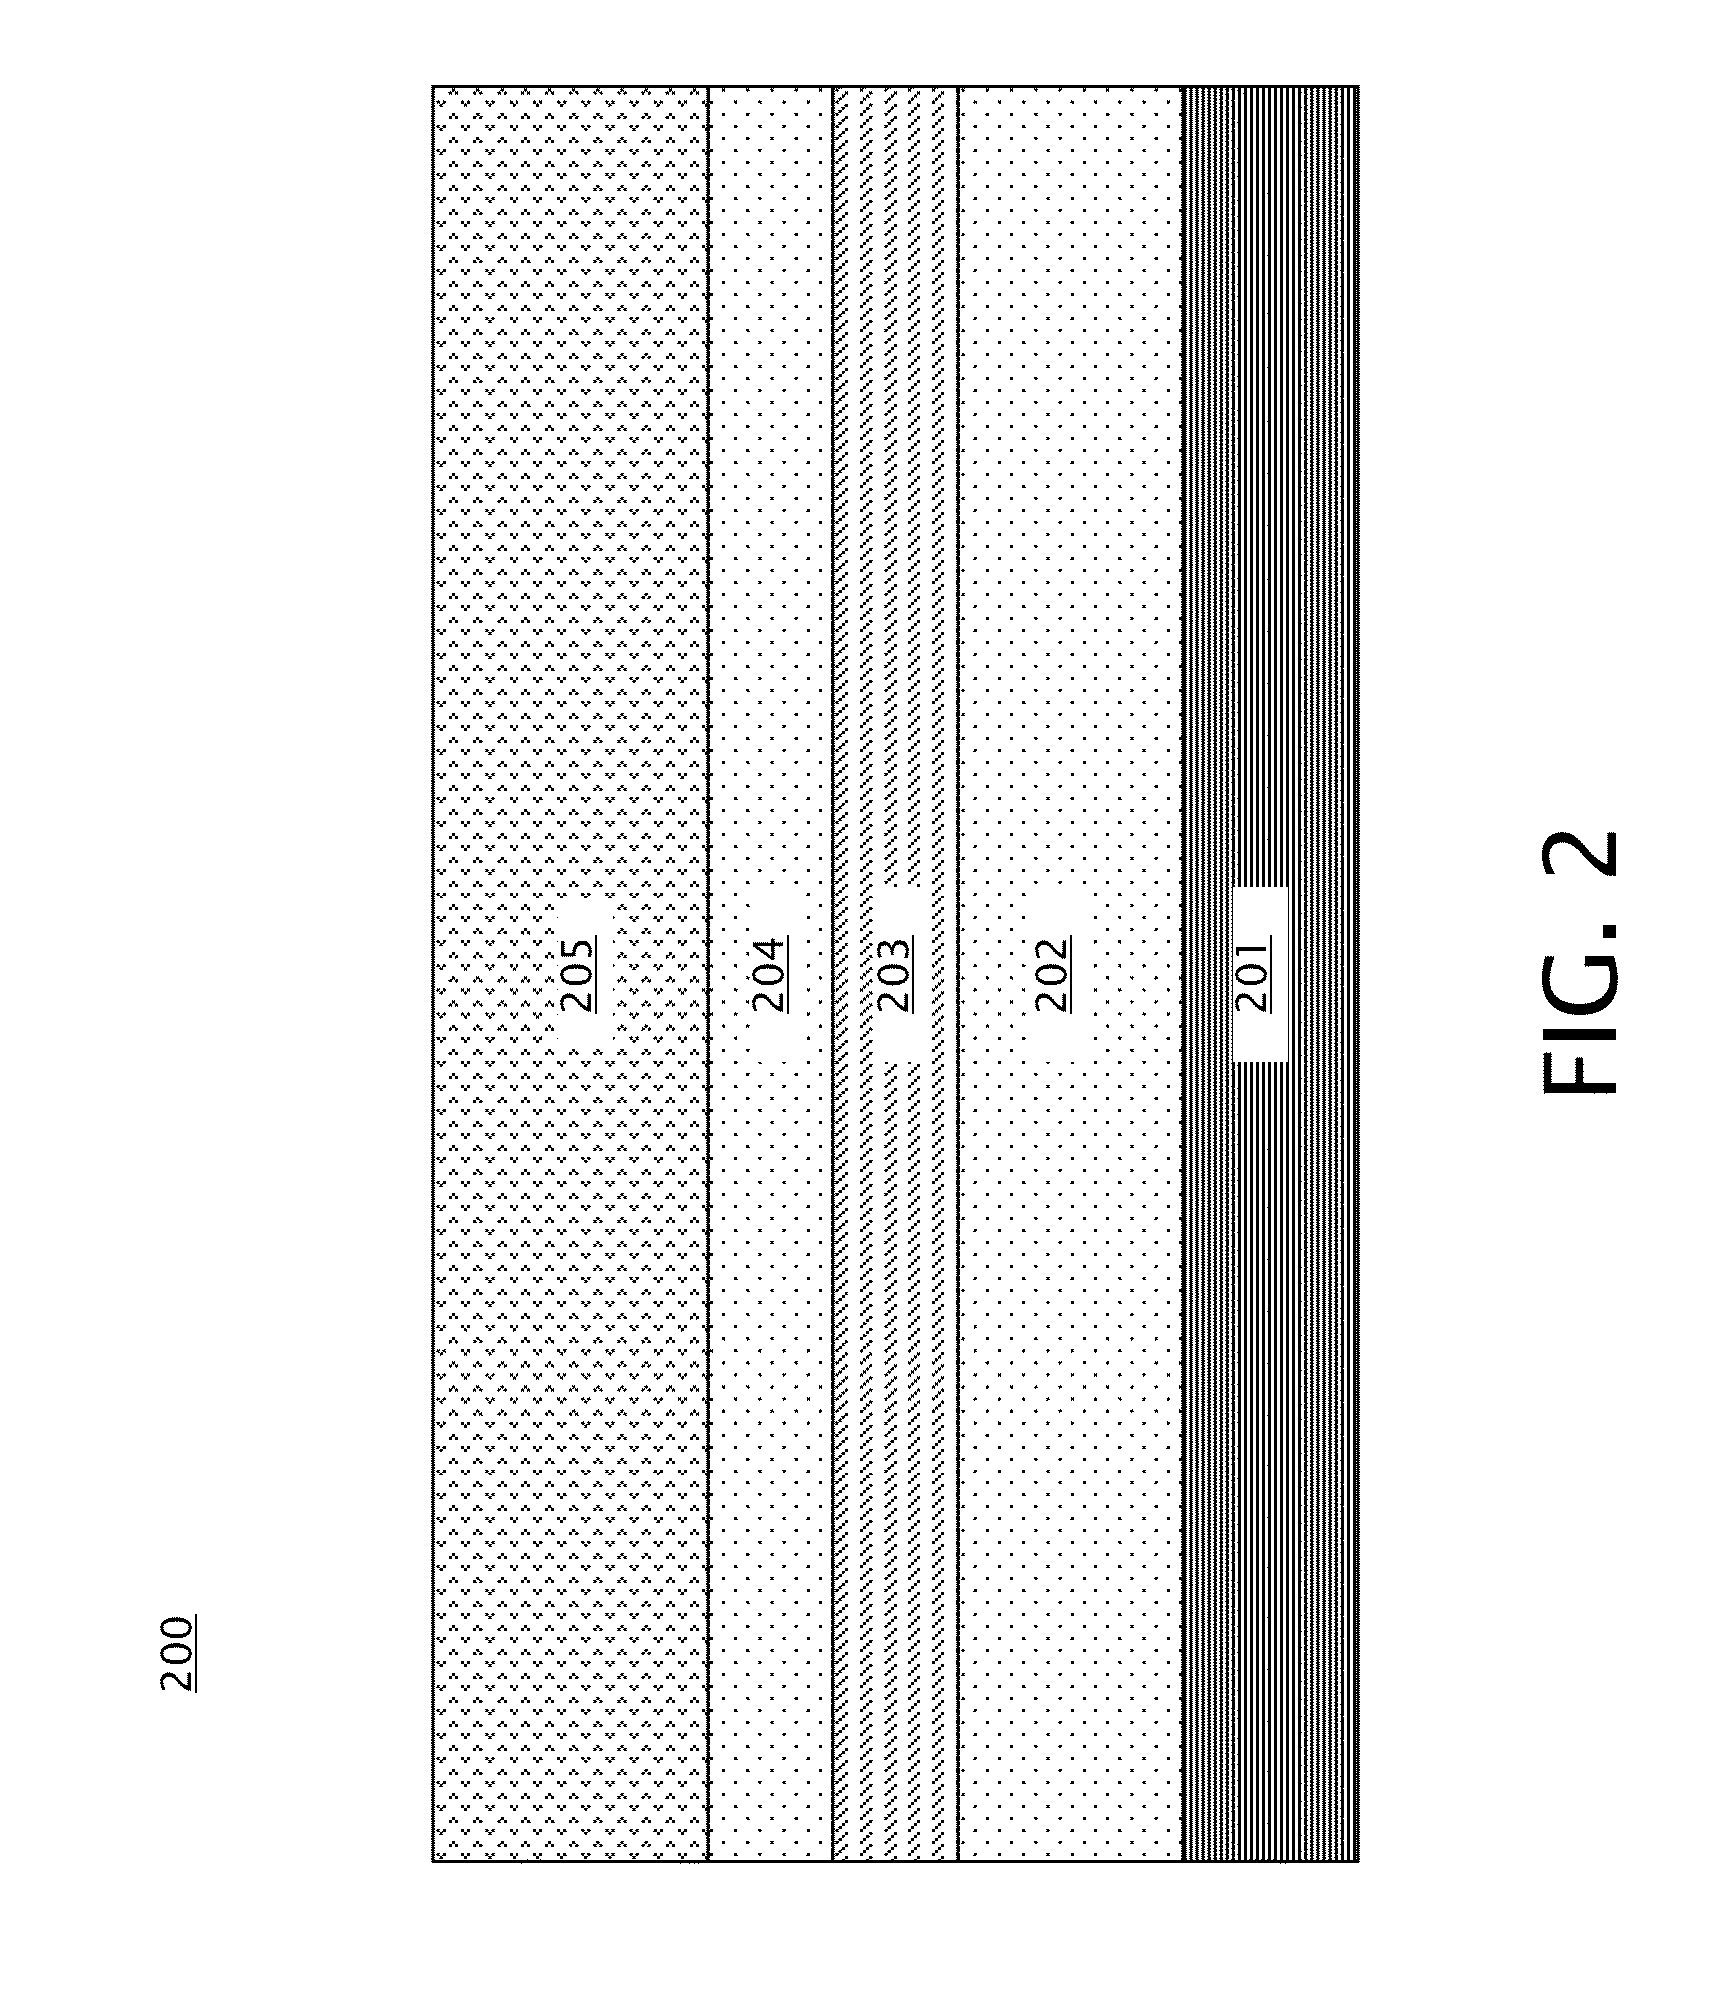 Fin field effect transistor with variable channel thickness for threshold voltage tuning